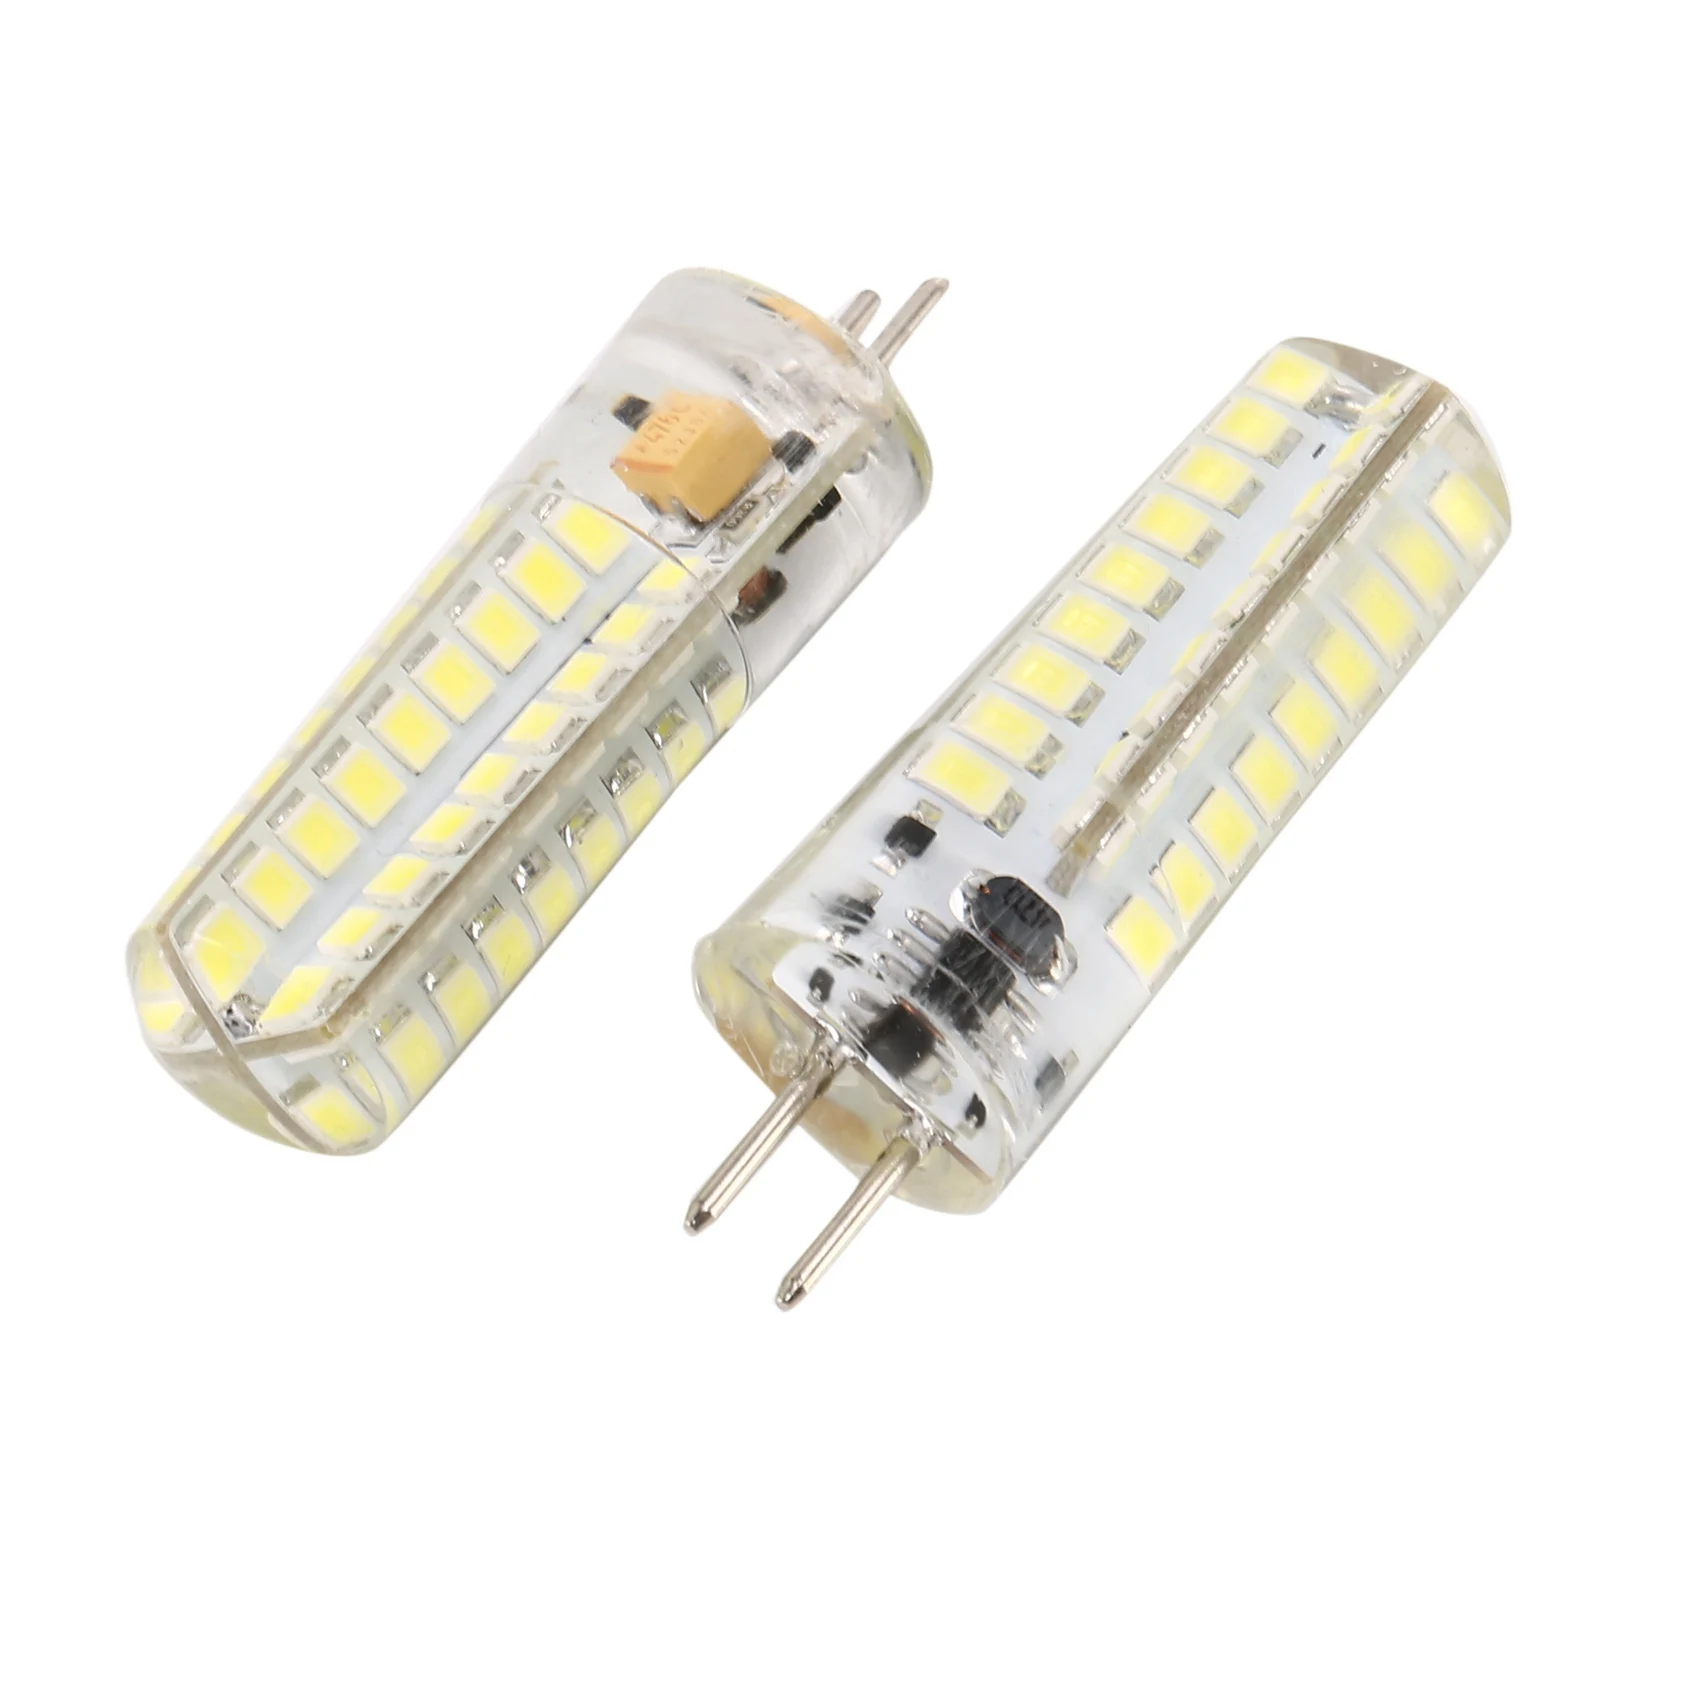 

2x 6.5W GY6.35 LED Bulbs 72 2835 SMD LED 320lm 50W Halogen Lamps Equivalent Dimmable Pure White 6000K 360 Degree Beam Angle S